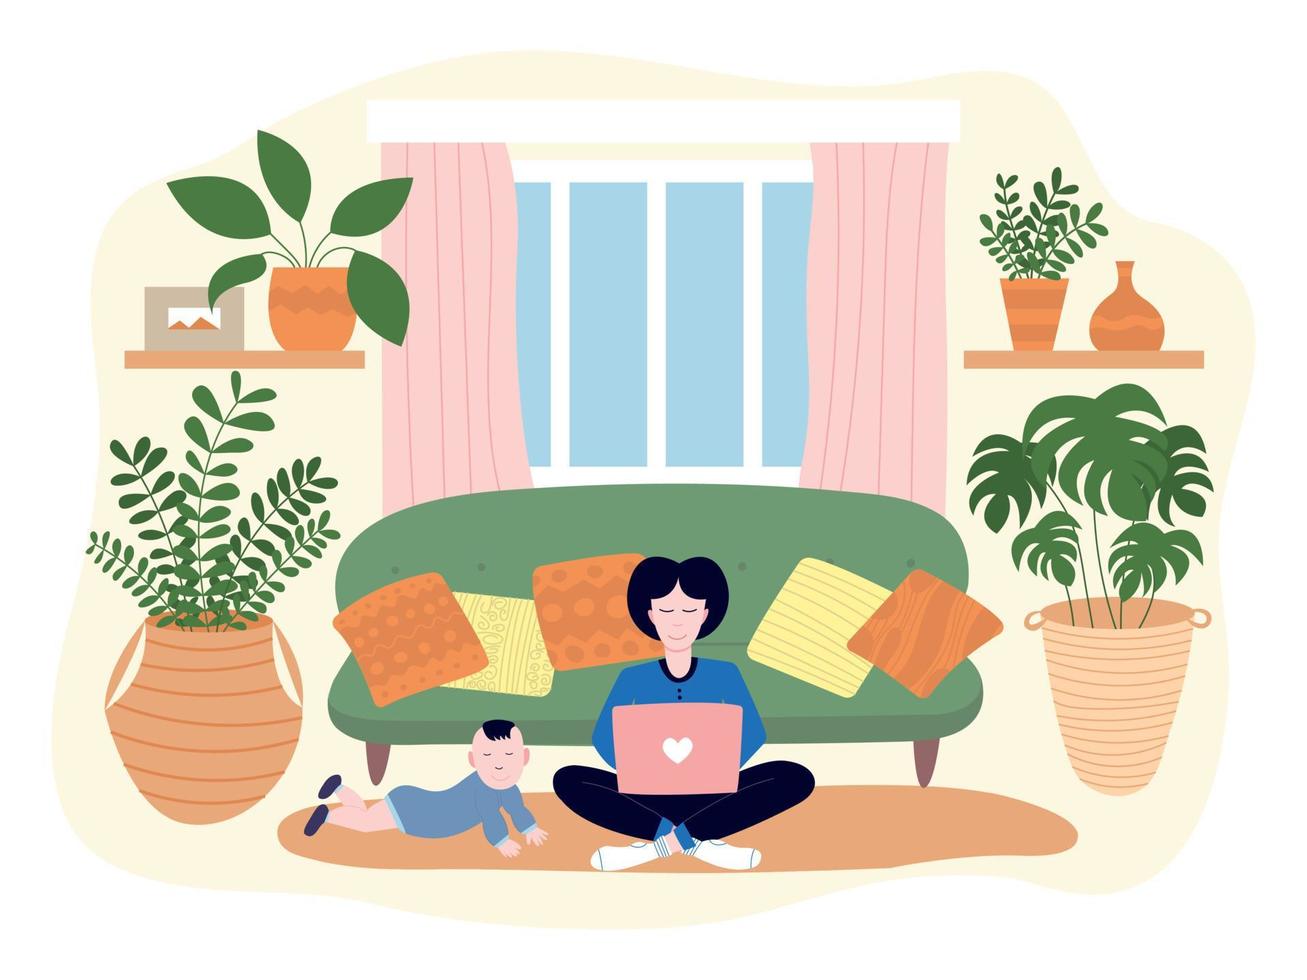 Young mother and her baby sitting on floor using laptop. Vector illustration with new mom working at home during maternity leave.